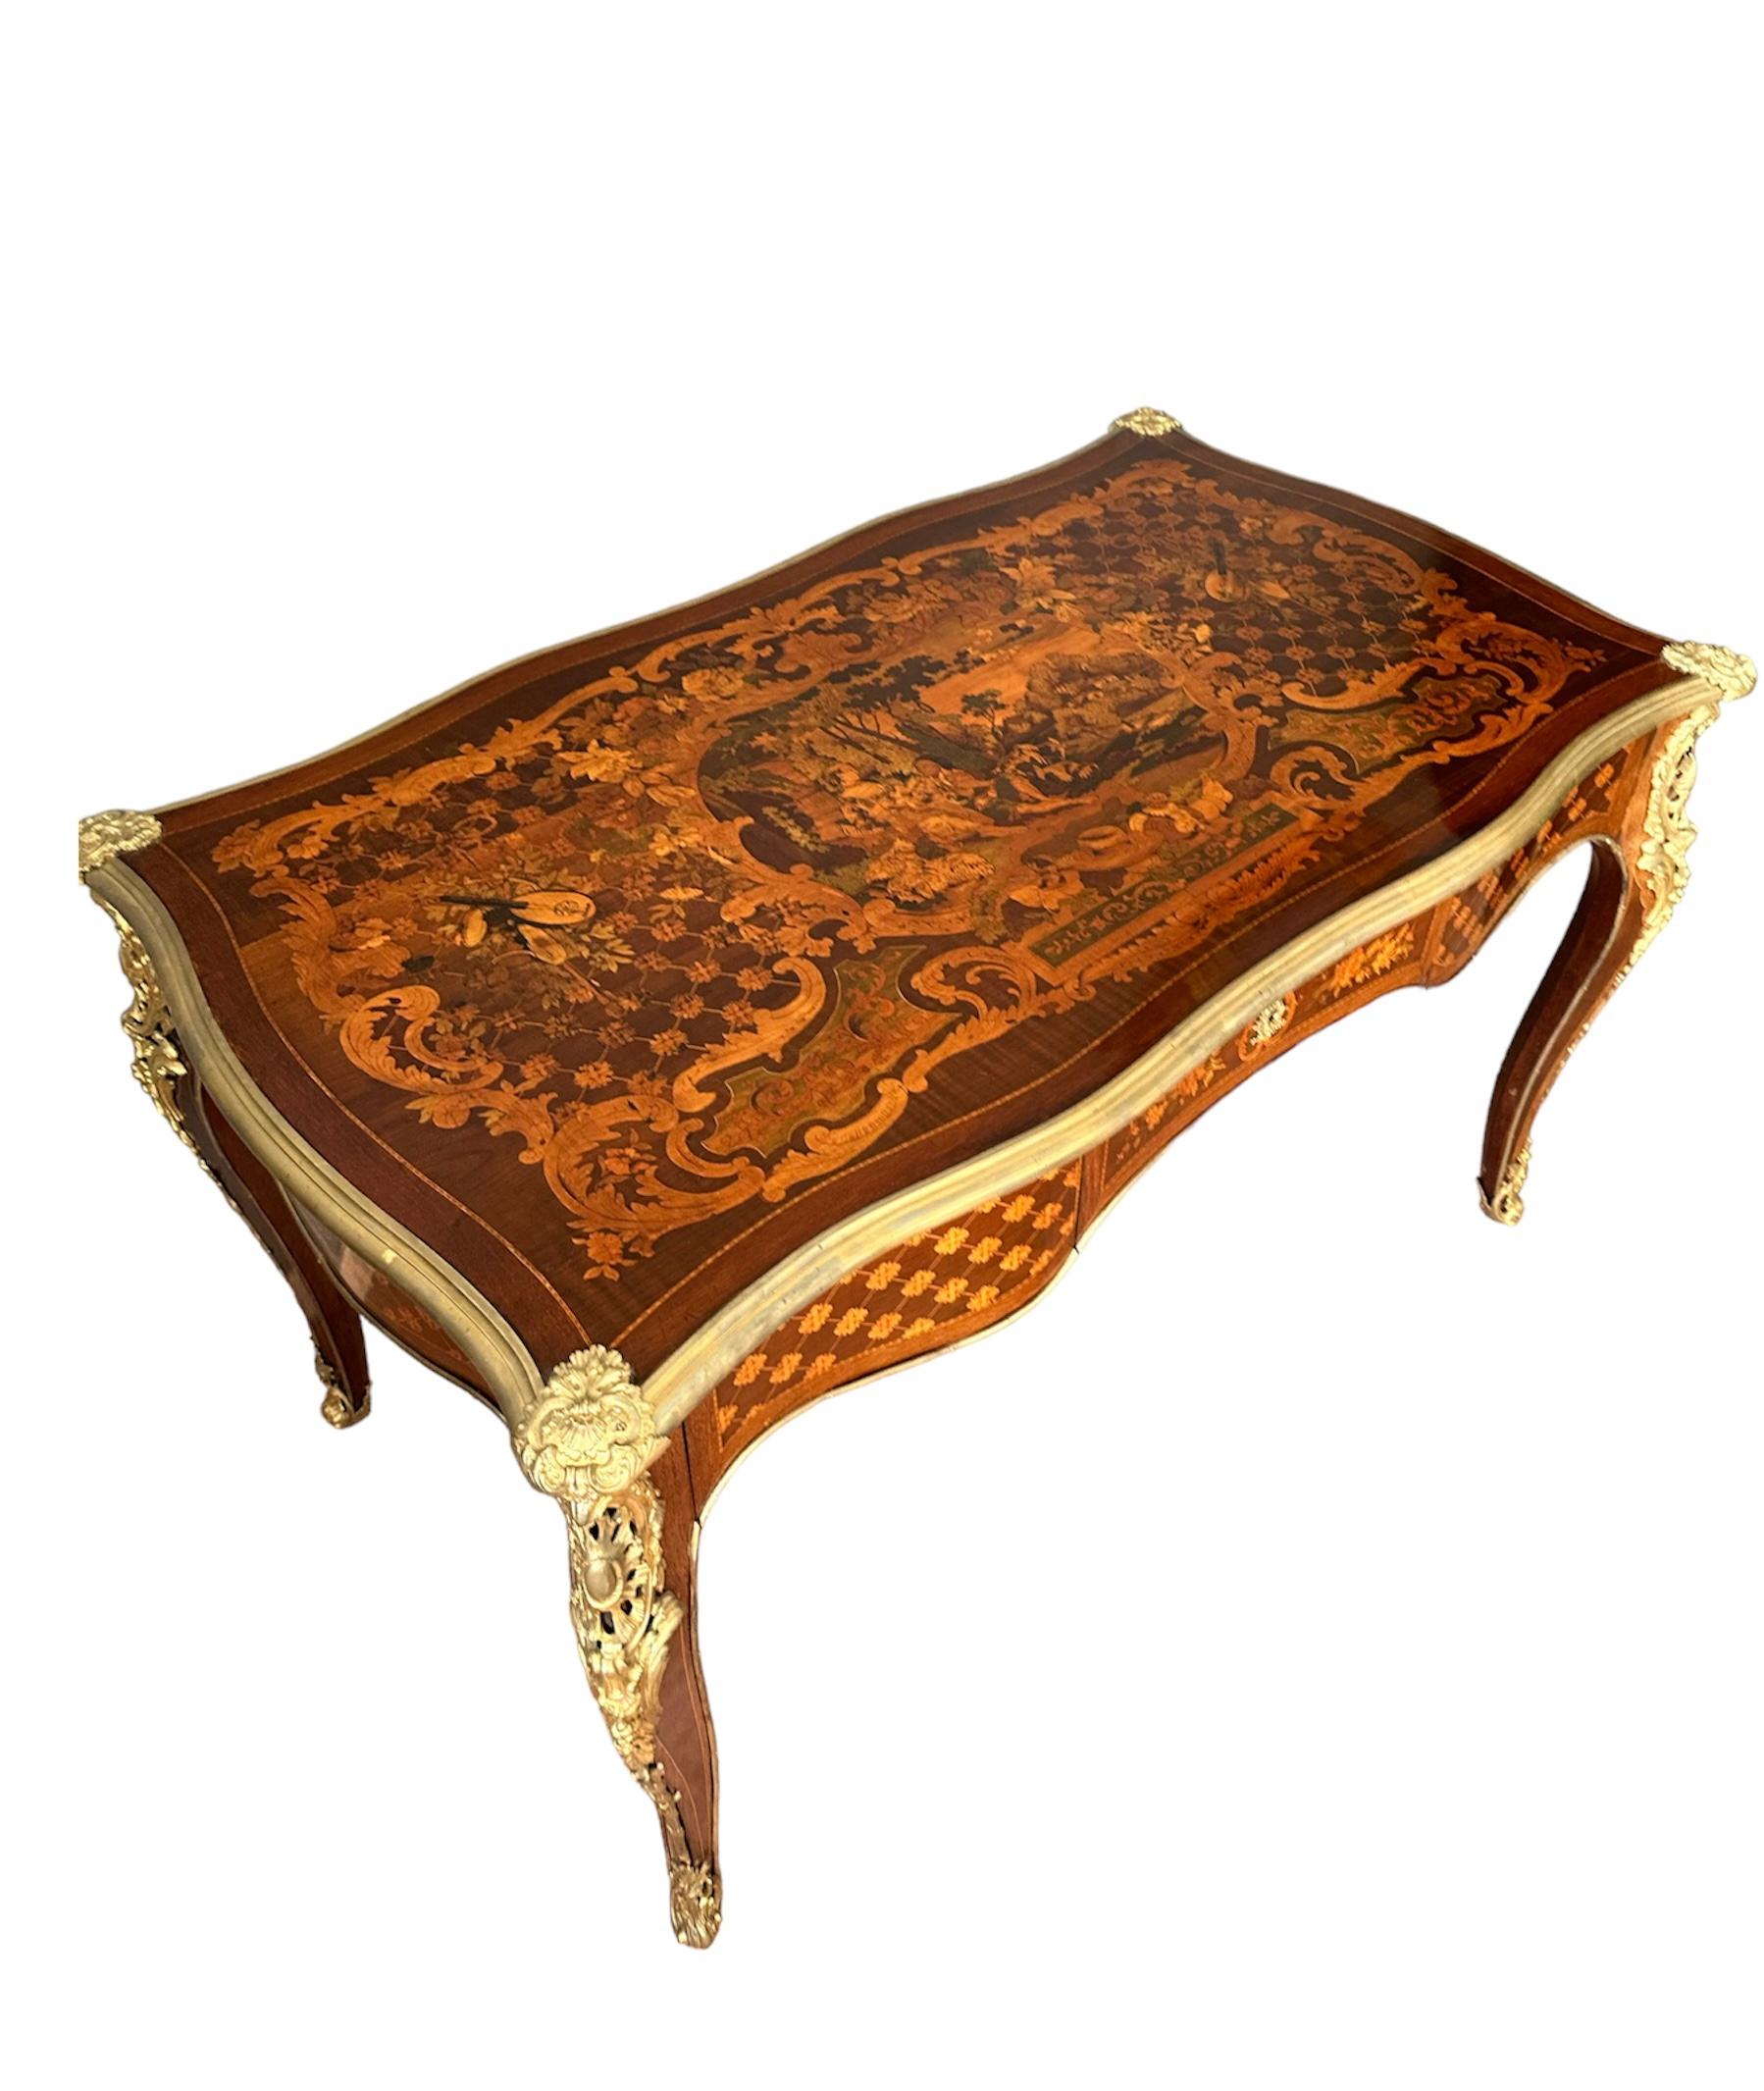 French 19th Century Inlaid Desk Mounted with Gilded Bronzes, by Paul Sormani